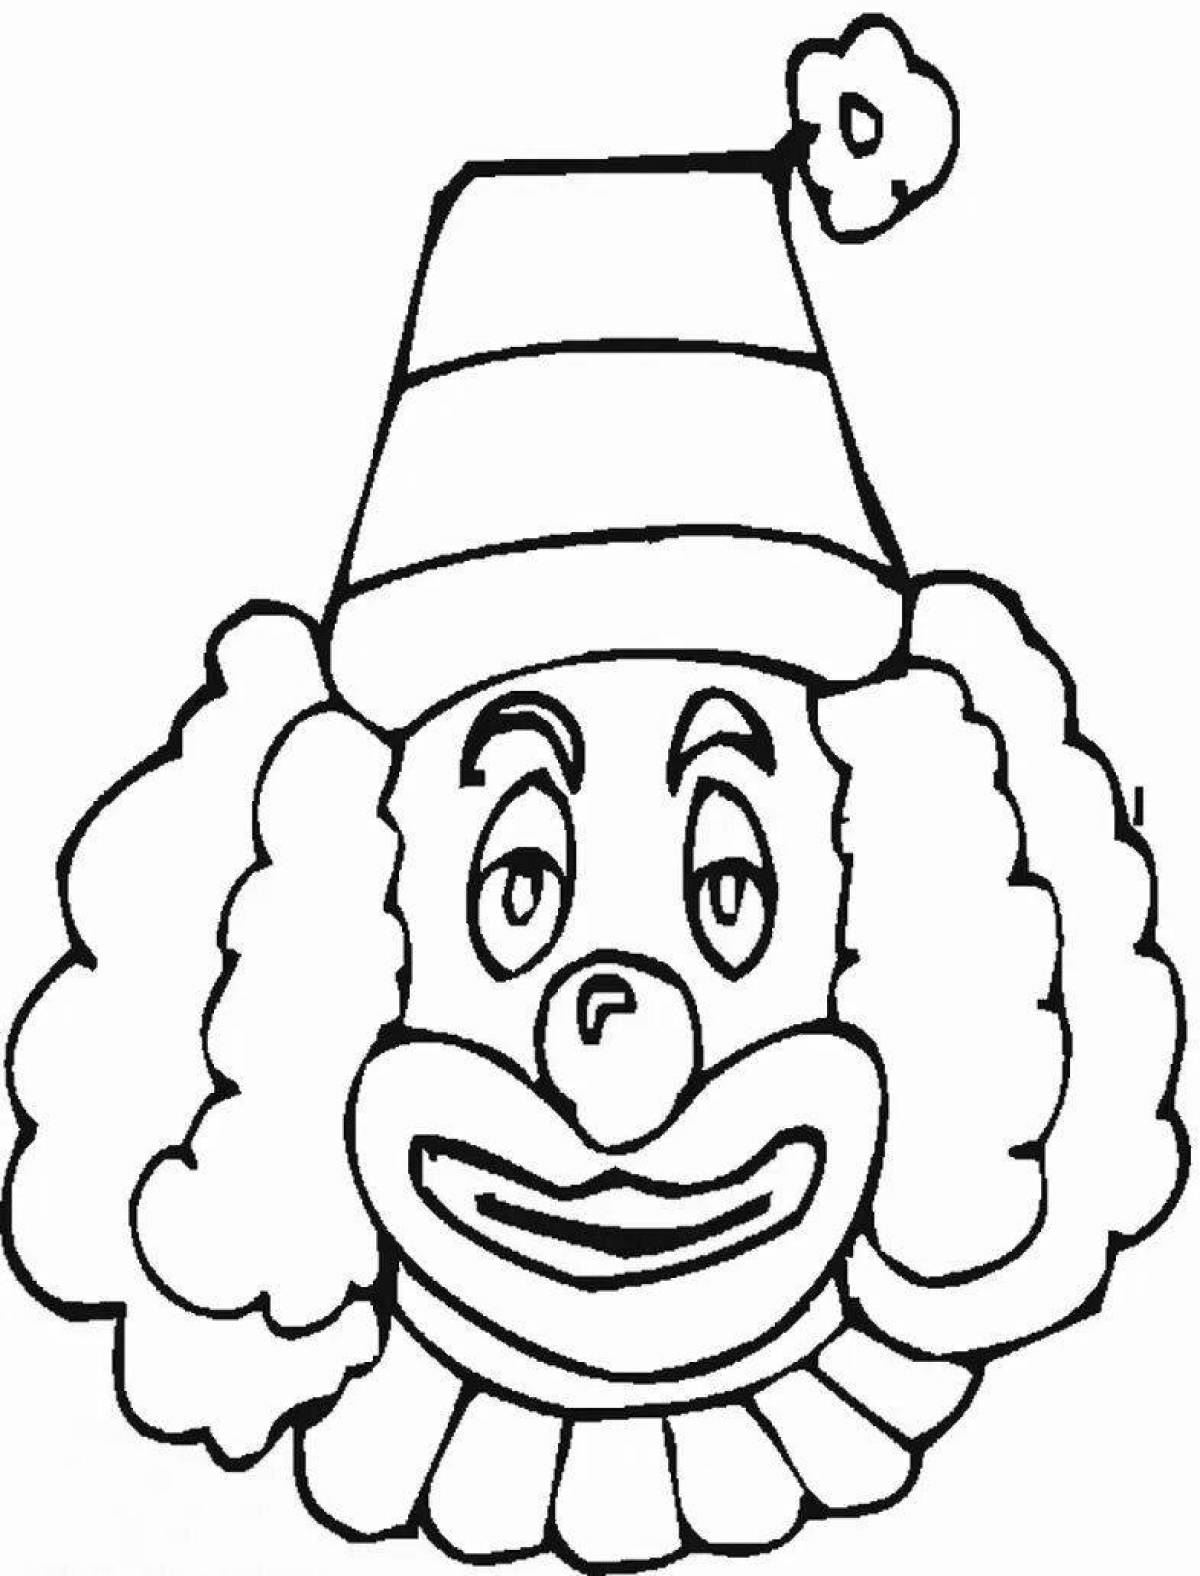 Fun coloring funny clown for kids